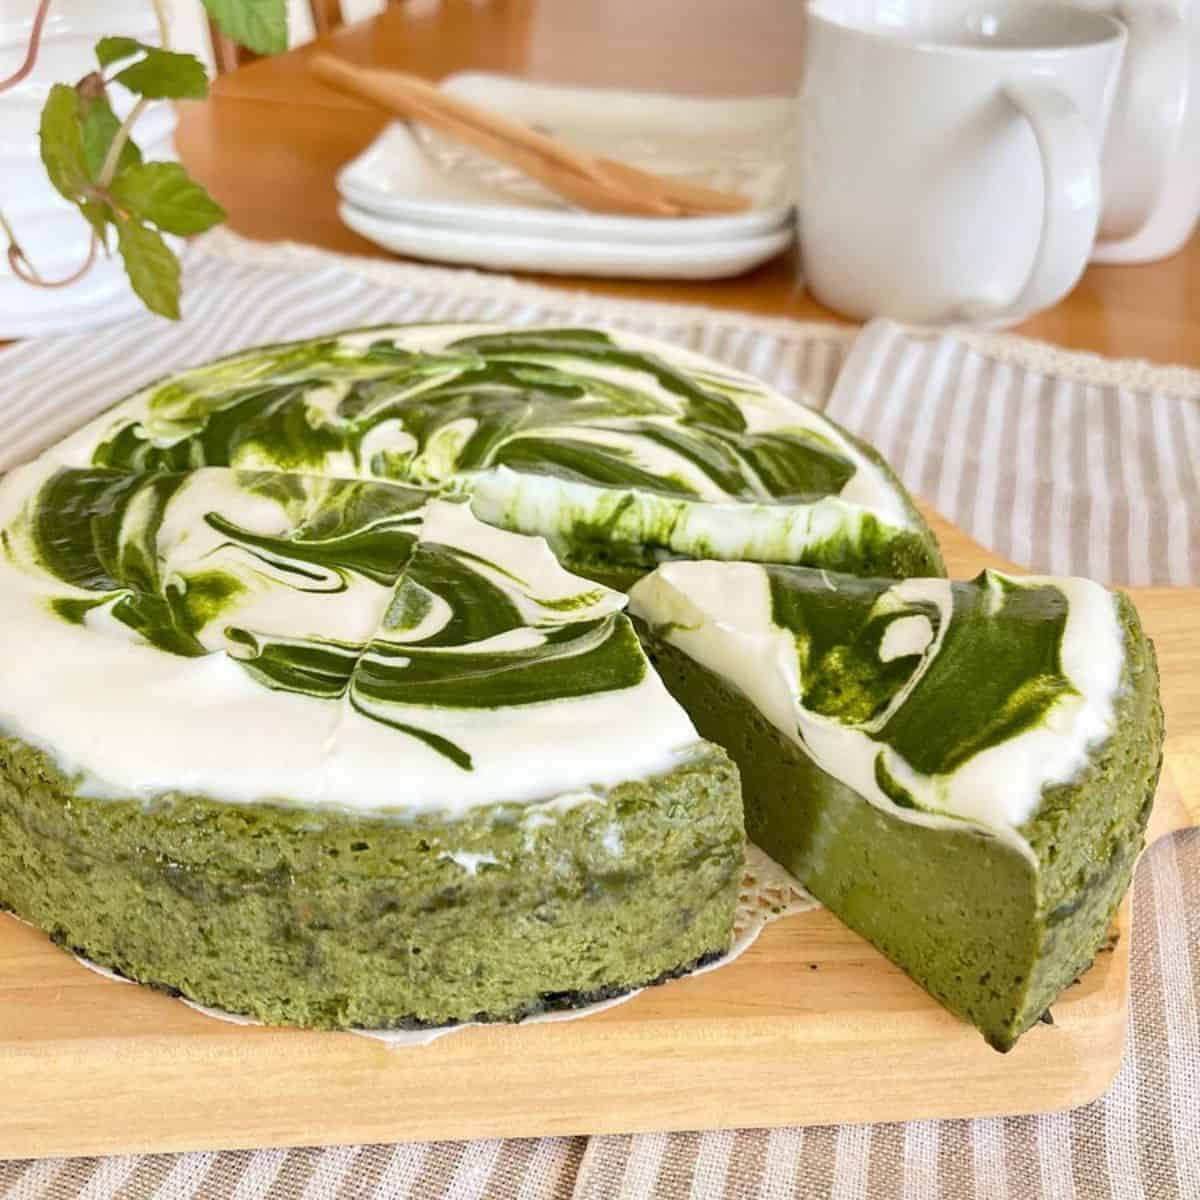 Matcha cheesecake on a woody board with white utensils in the background